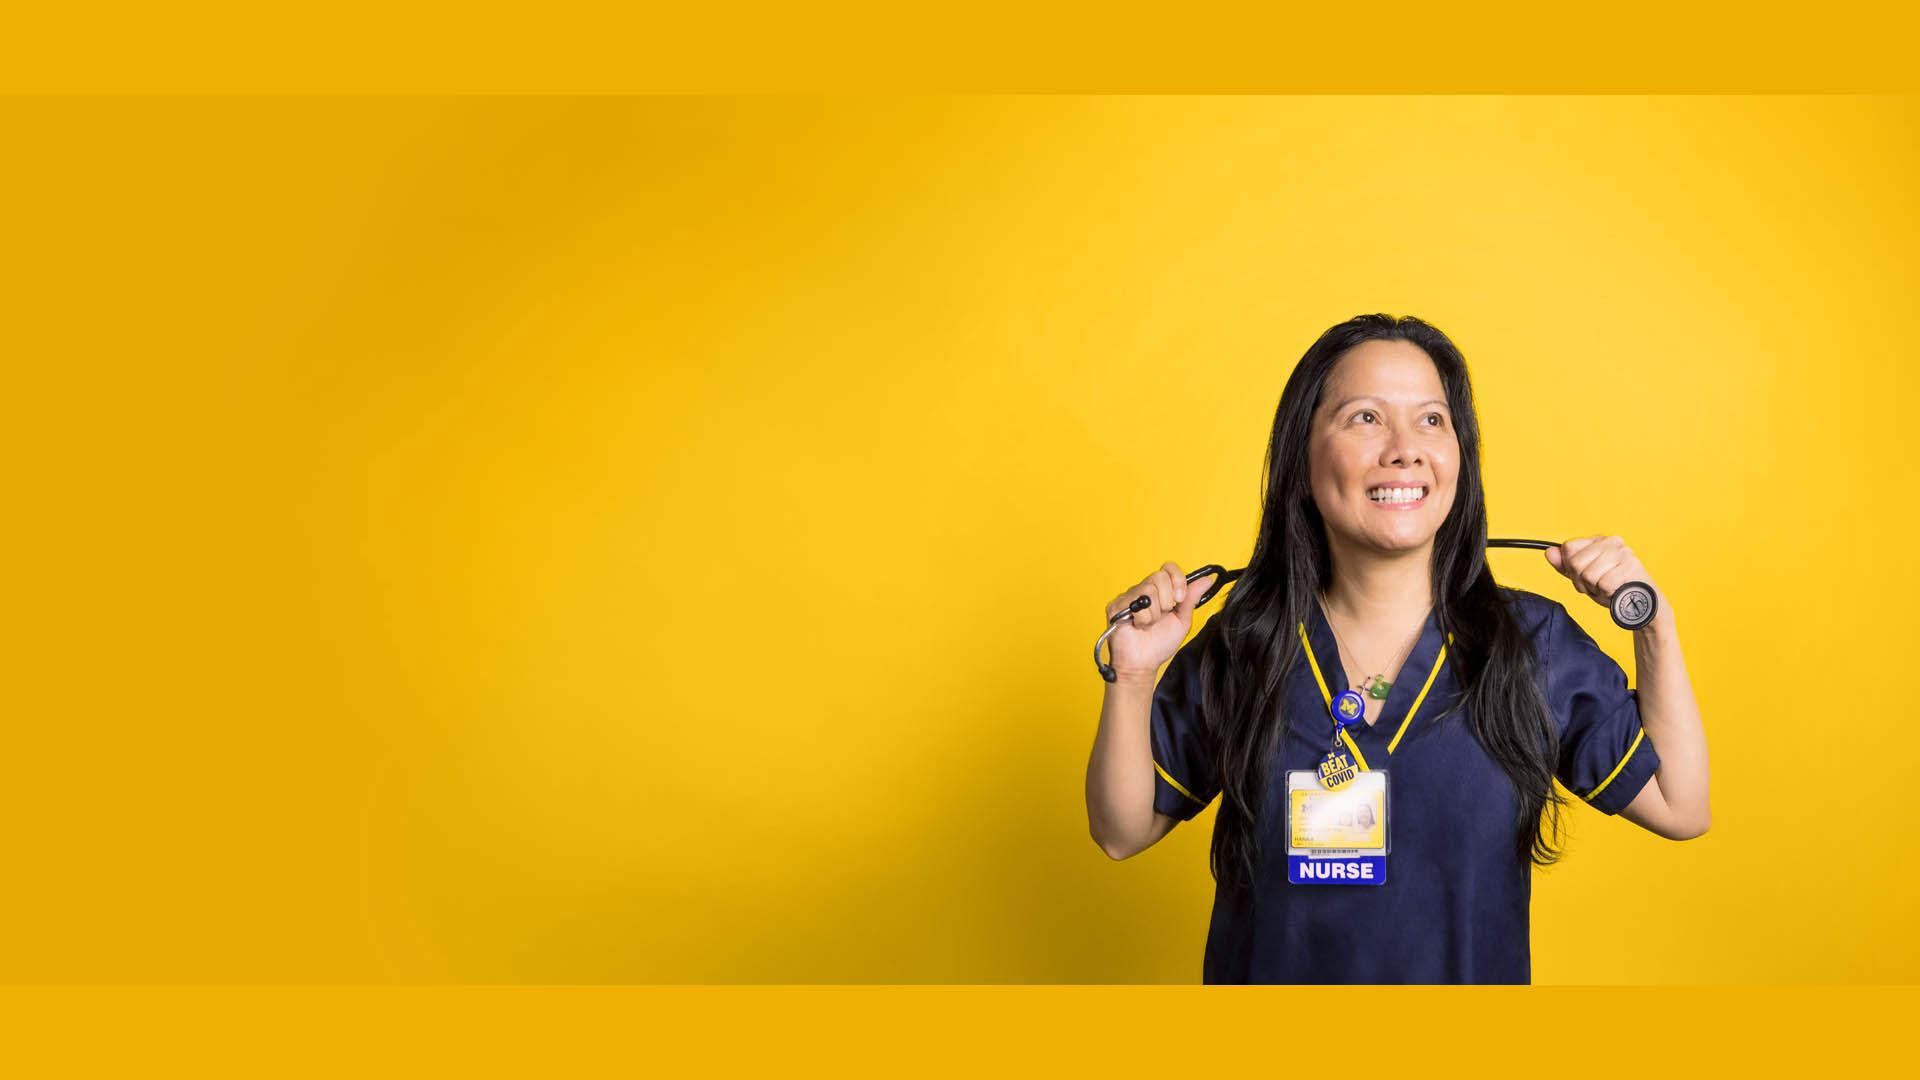 Female nurse smiling wearing maize and blue and holding stethoscope behind neck